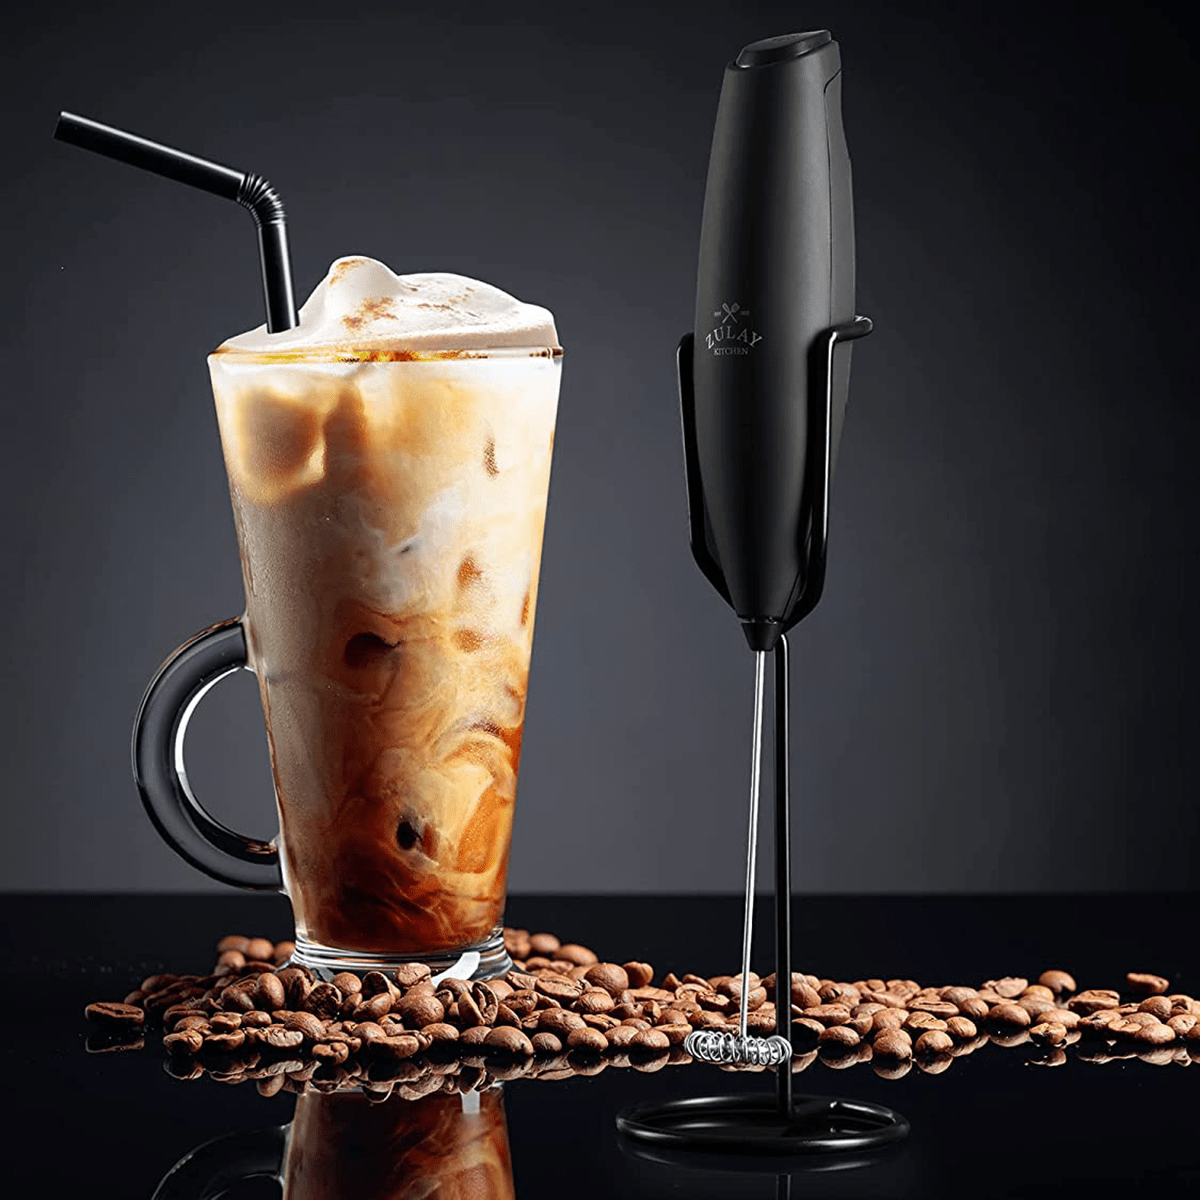  Zulay Mini Frother and Mixer - Travel Milk Frother for